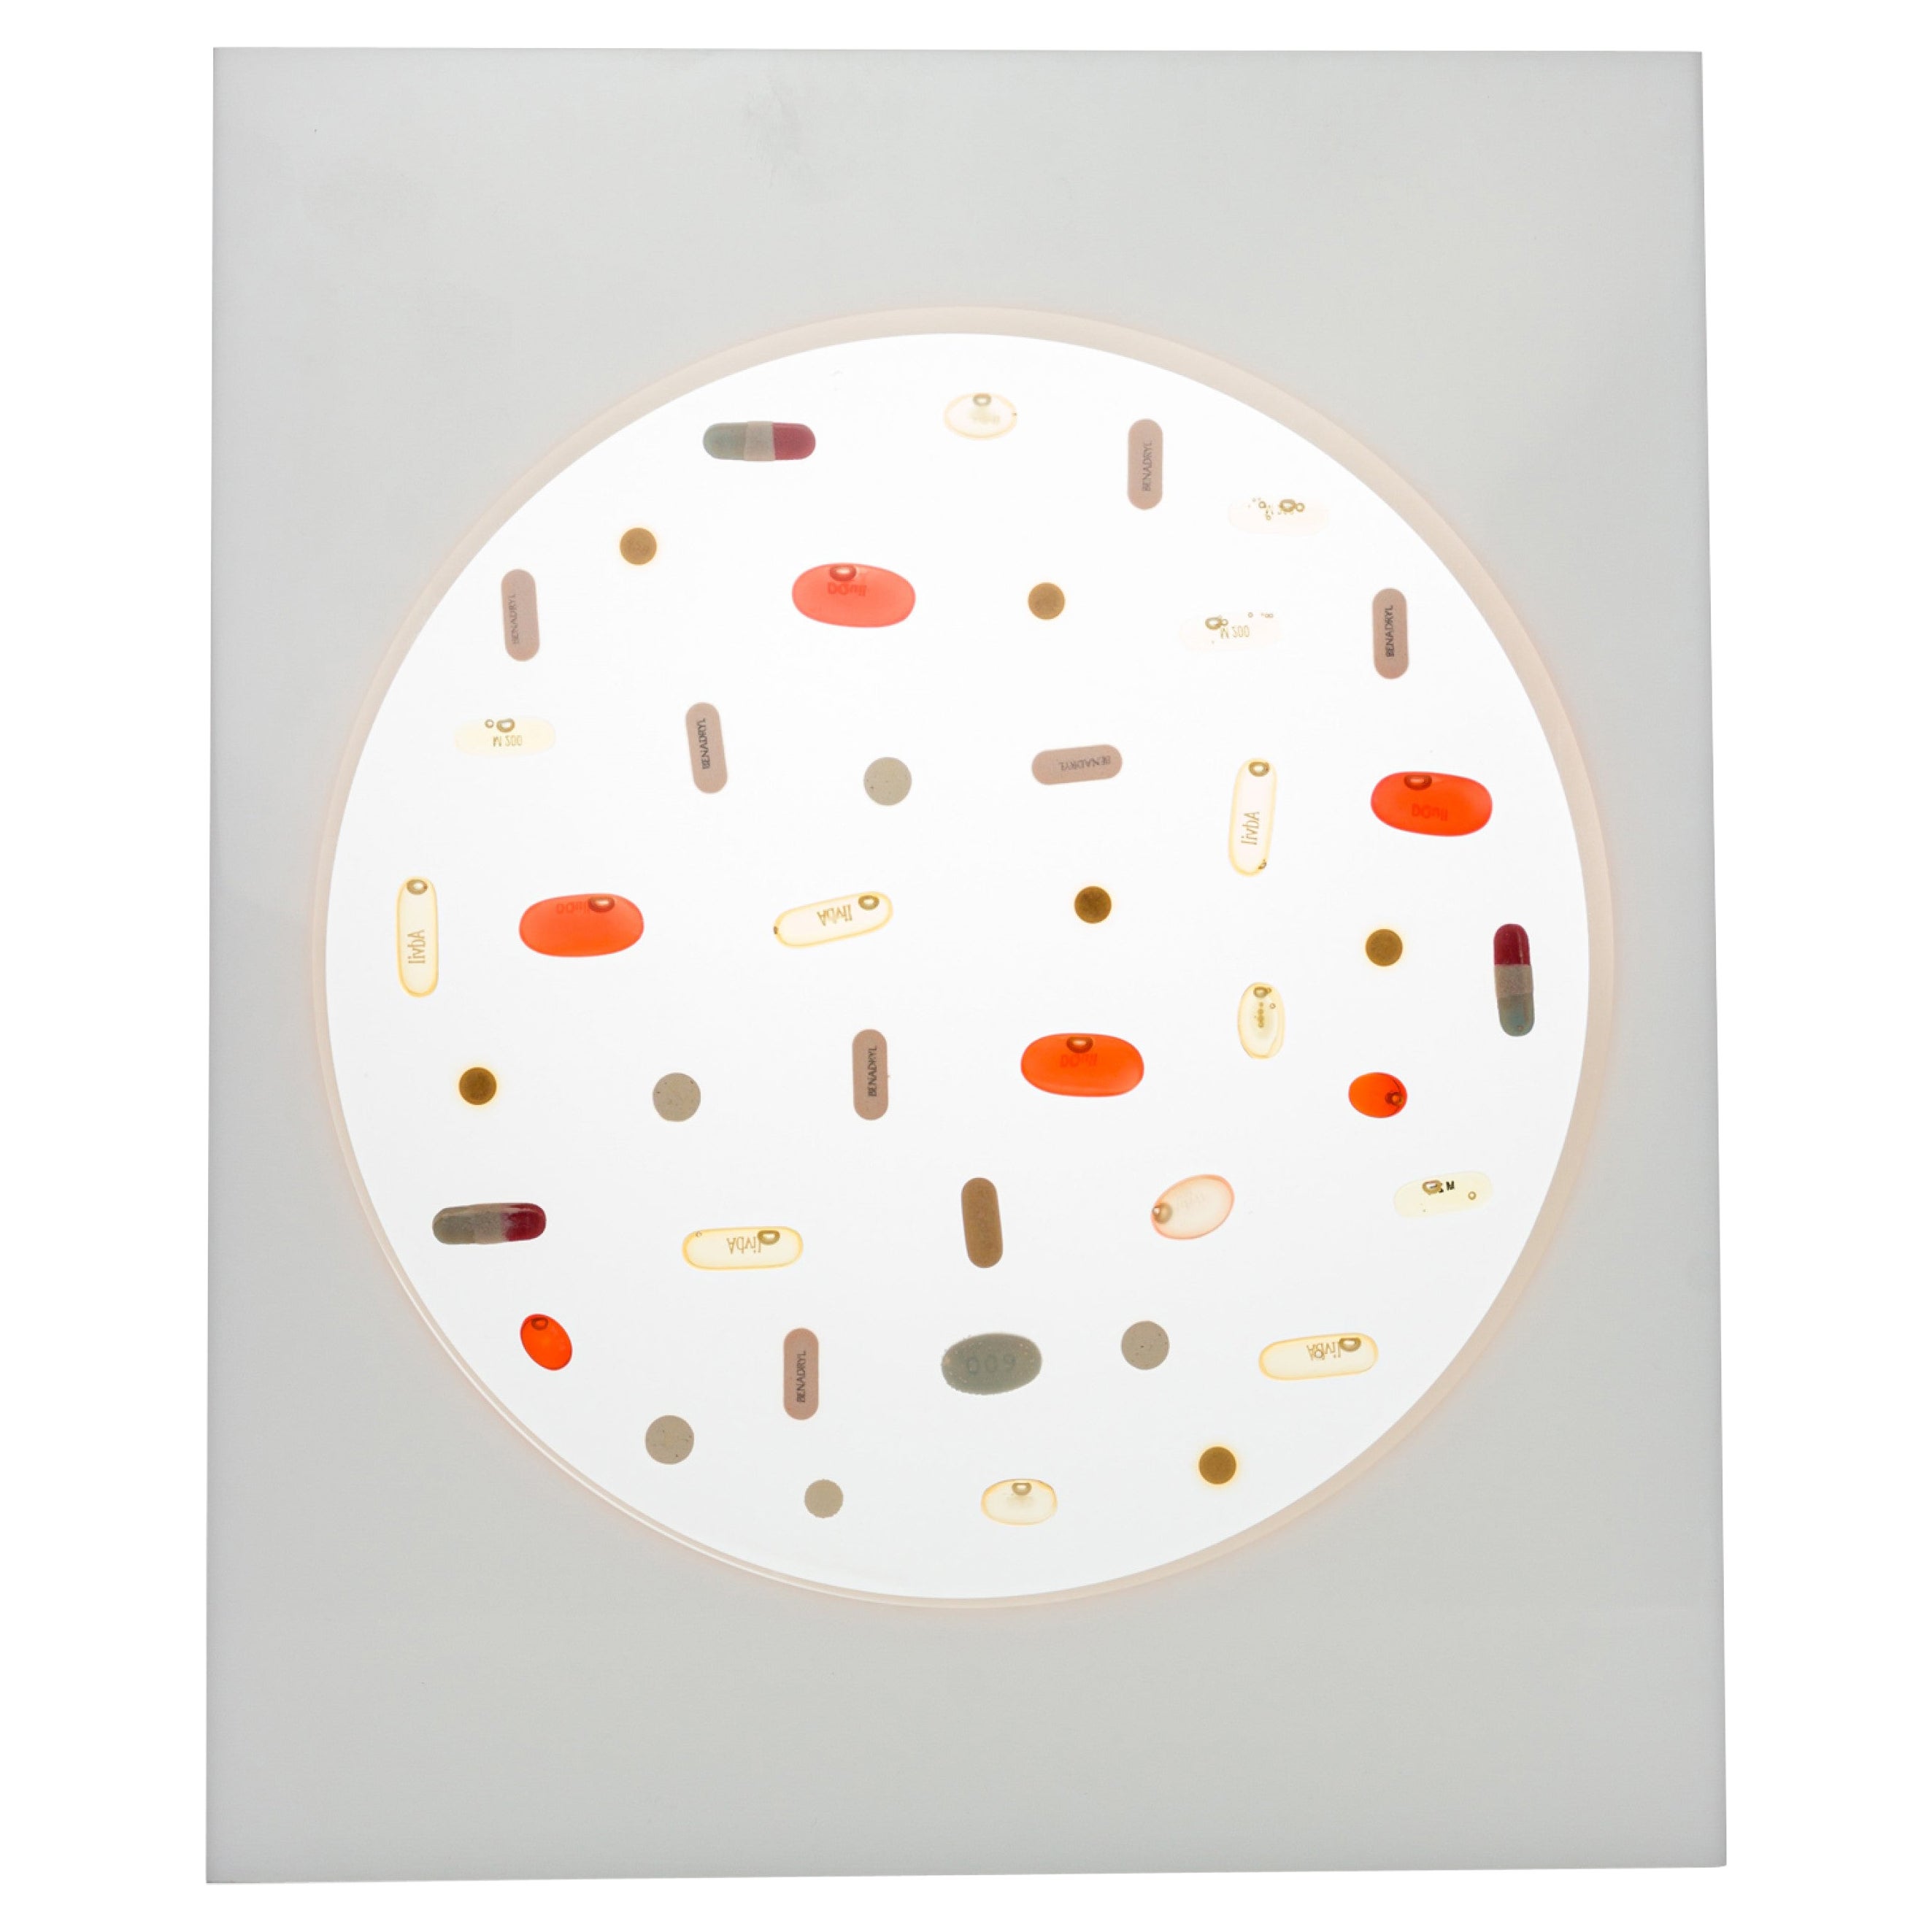 Ray Geary Contemporary \ Resin and Pill Sculpture Titled "White Pill Circle" For Sale